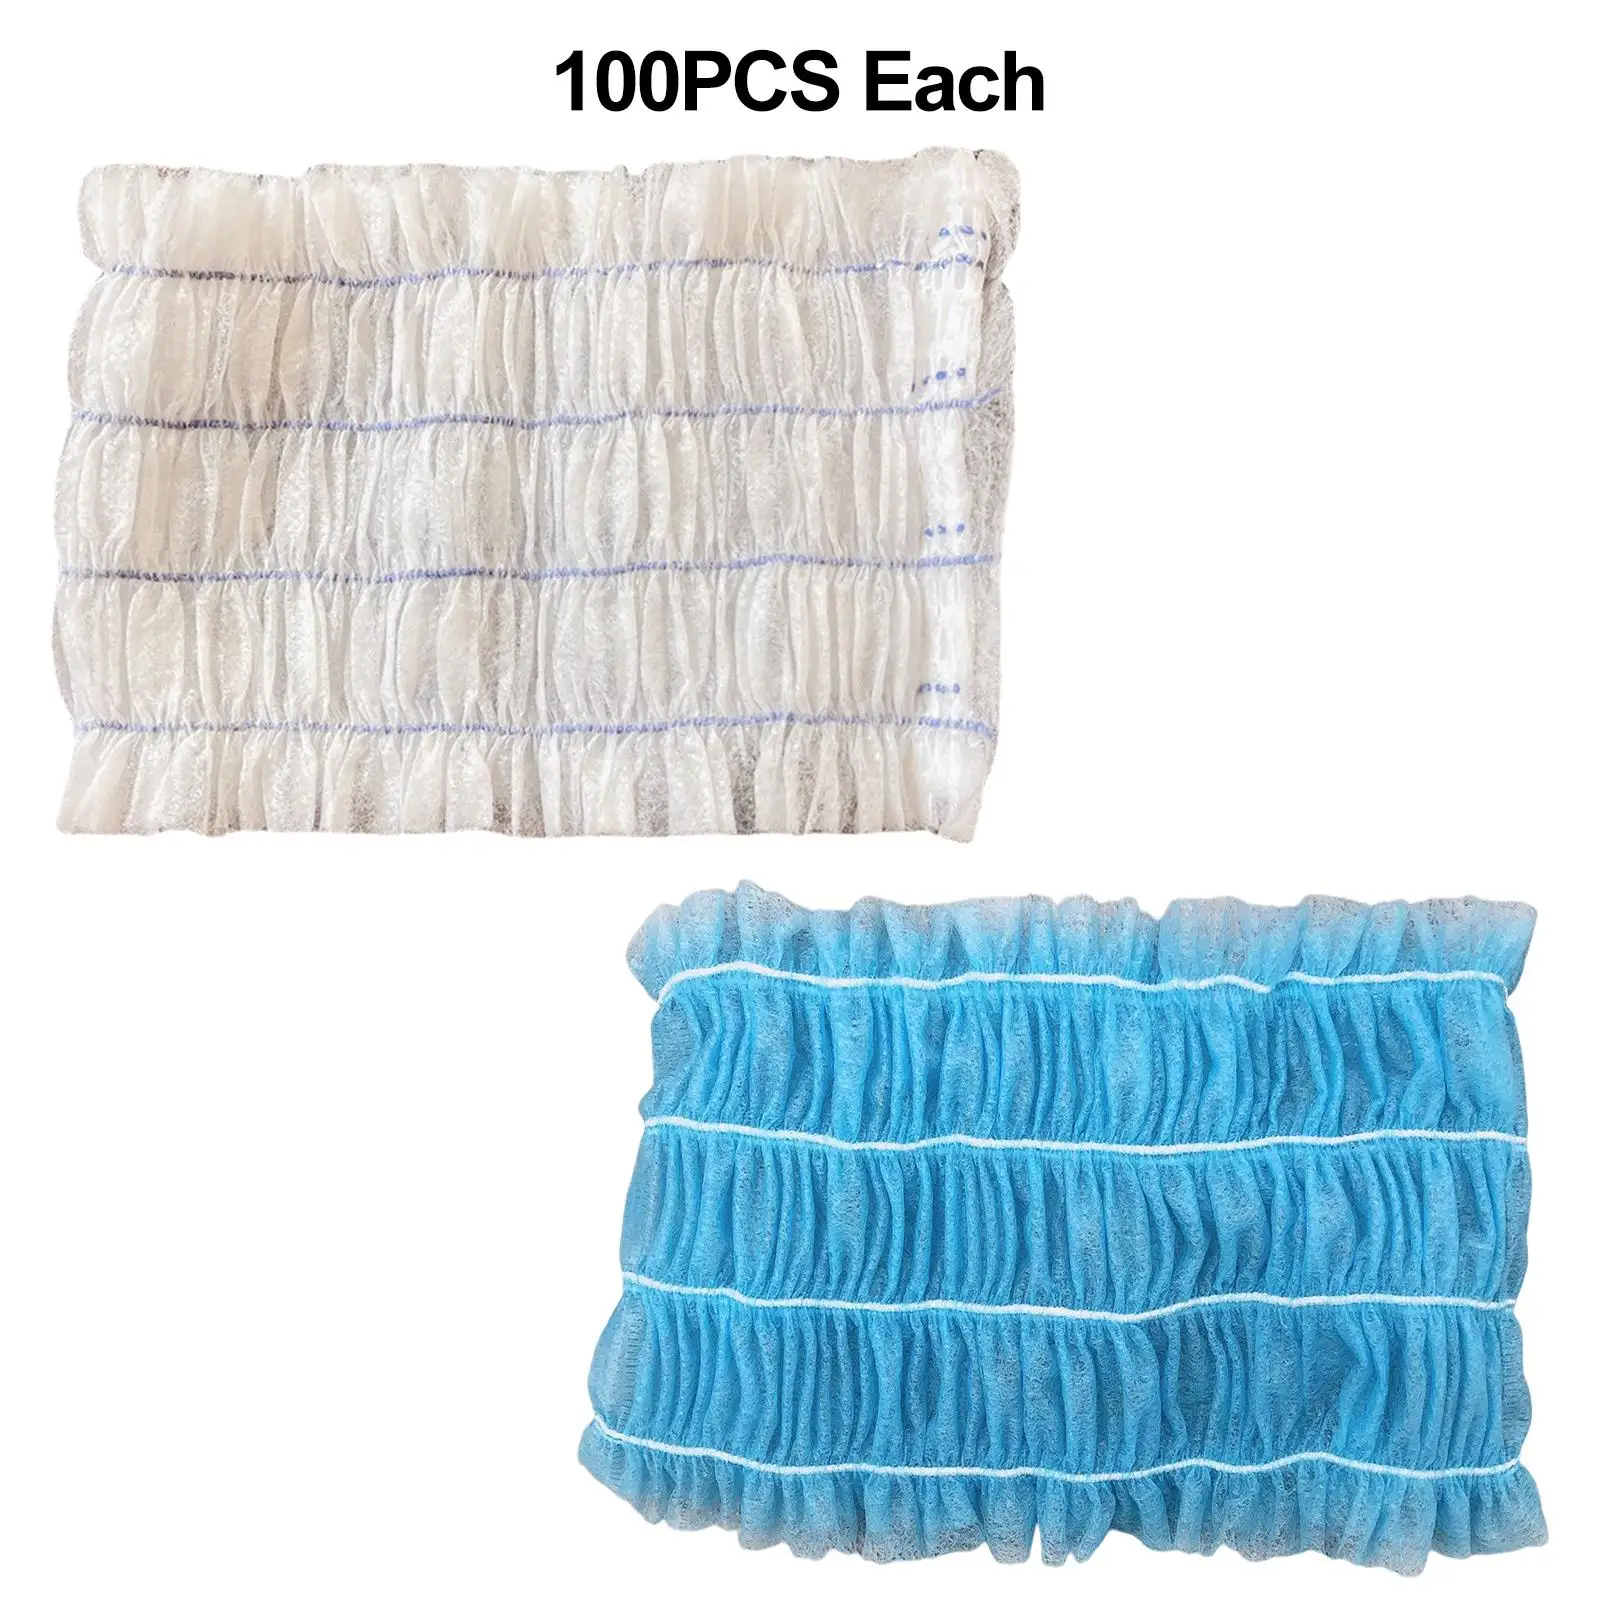 100 Pieces  SPA Headbands Hair Band for Tanning Sauna